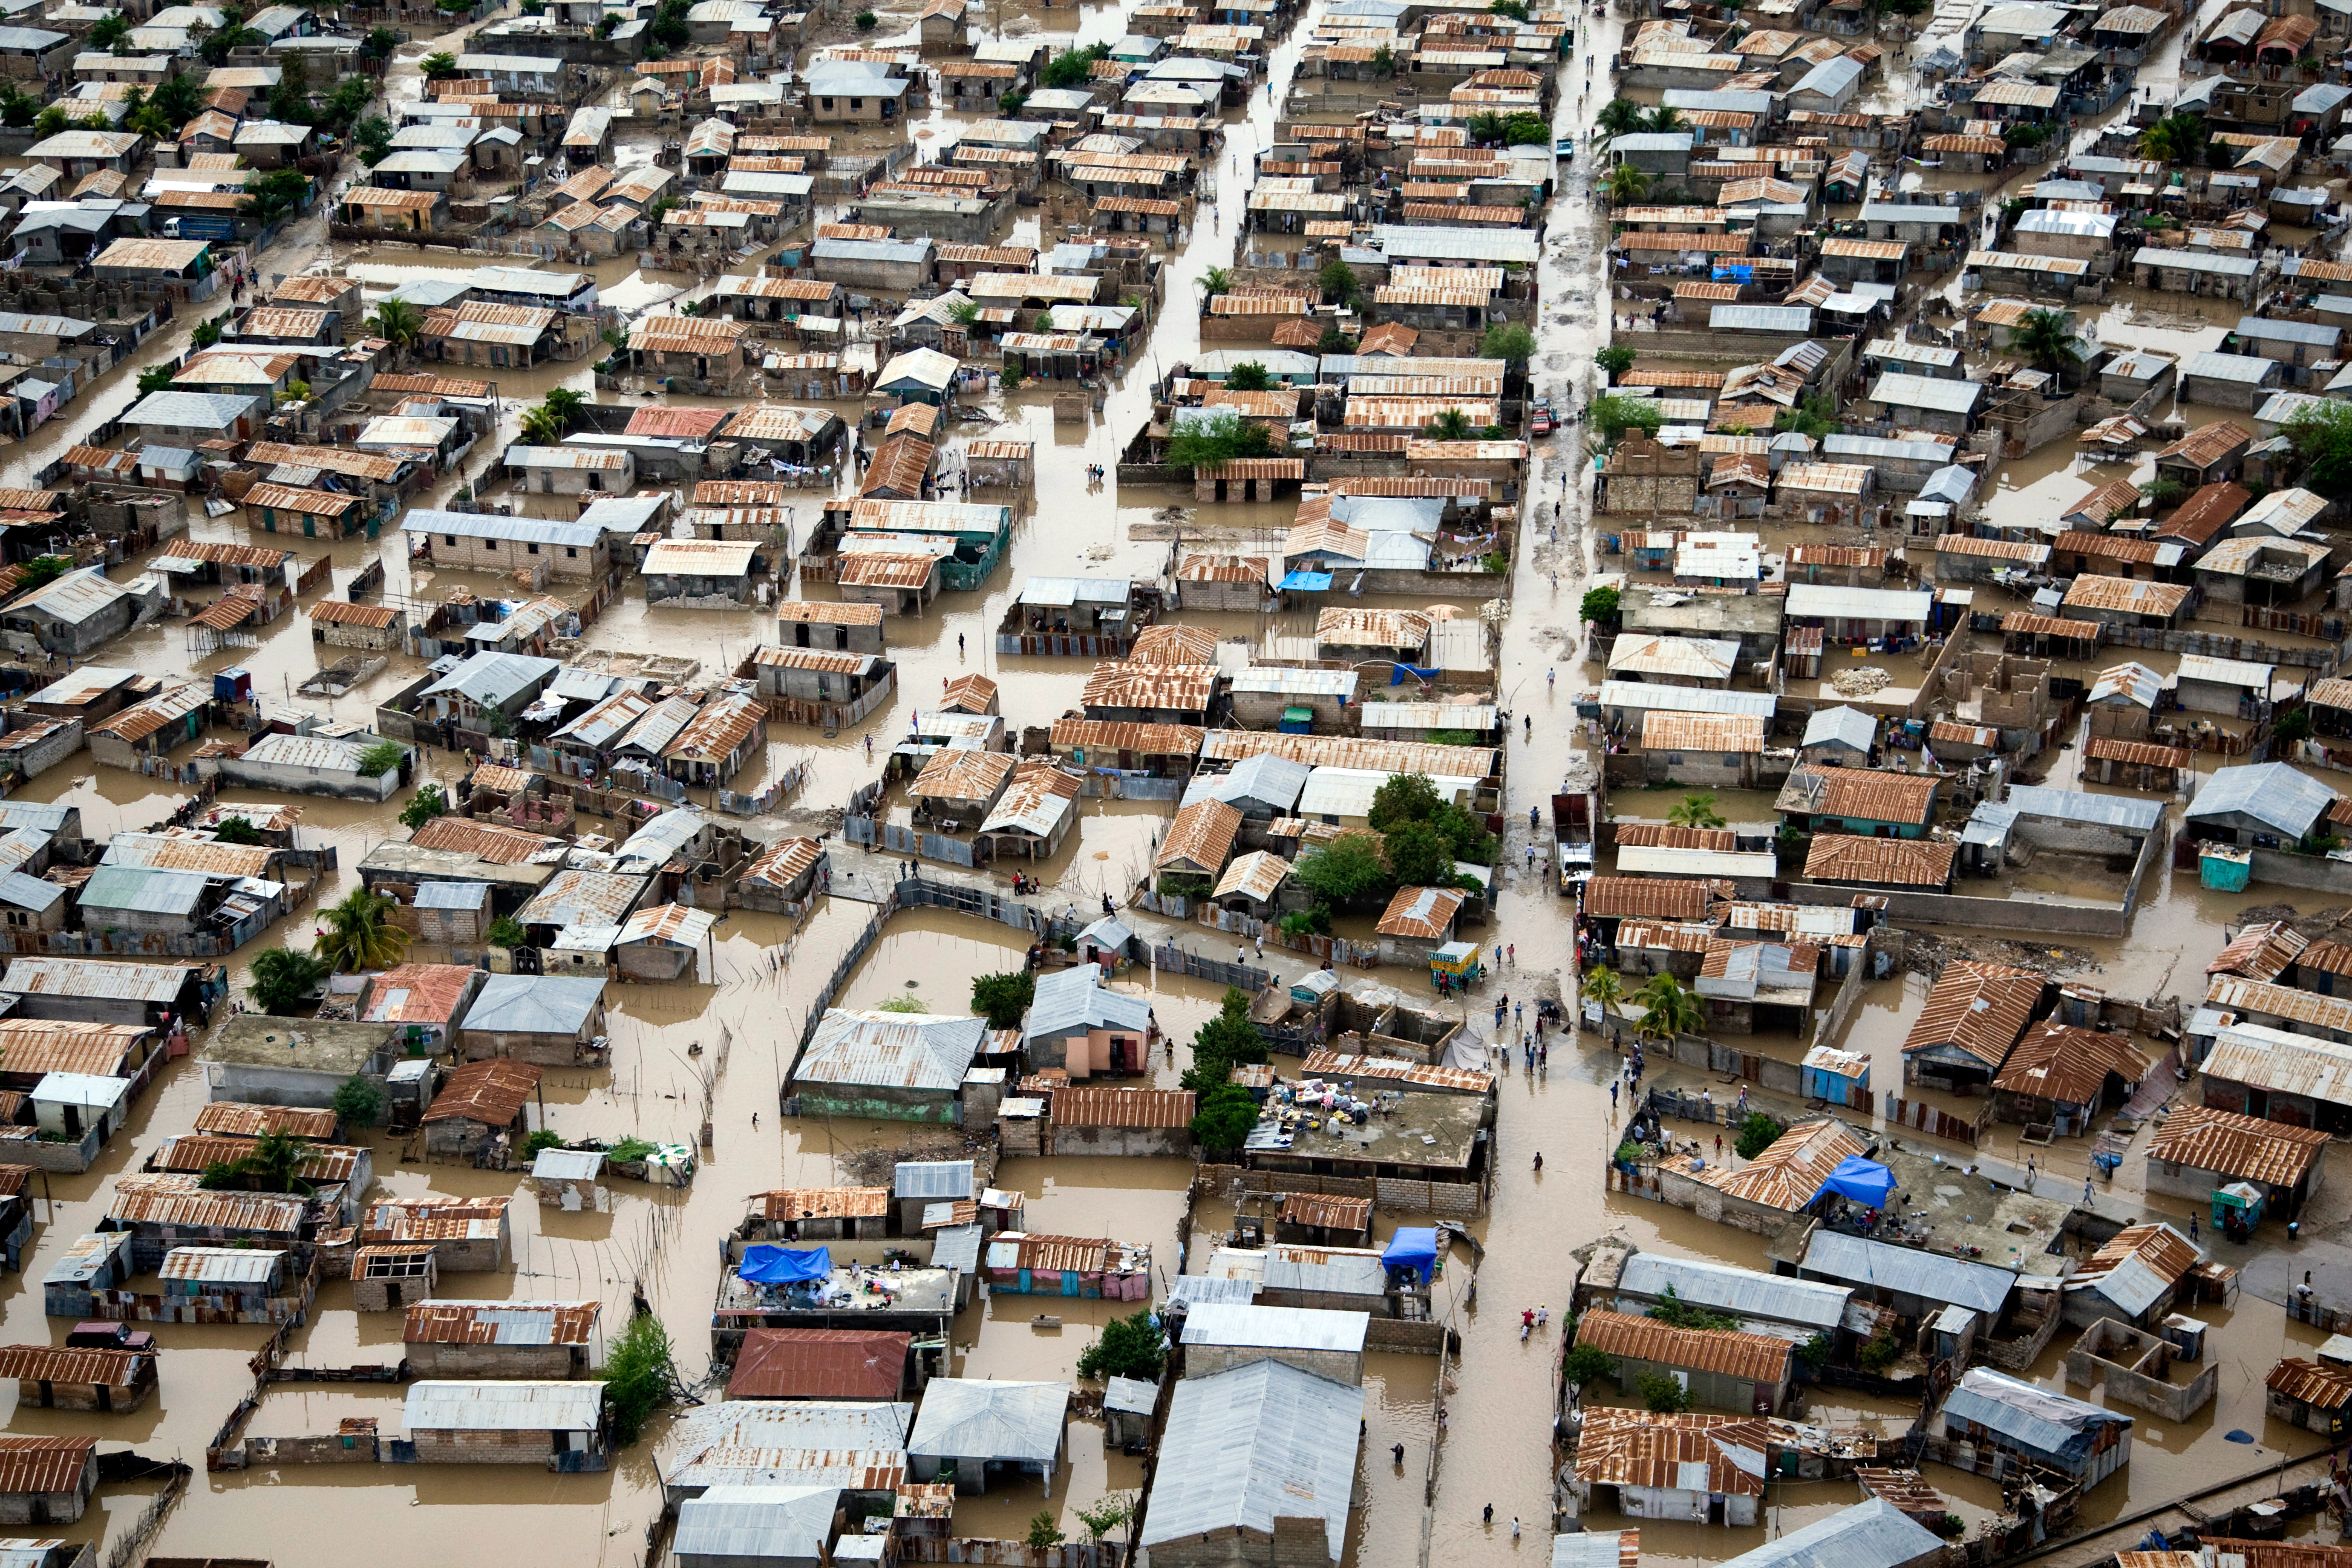 Flooded roads and paths in Gonaives, Haiti, after hurricane Tomas passed through the area